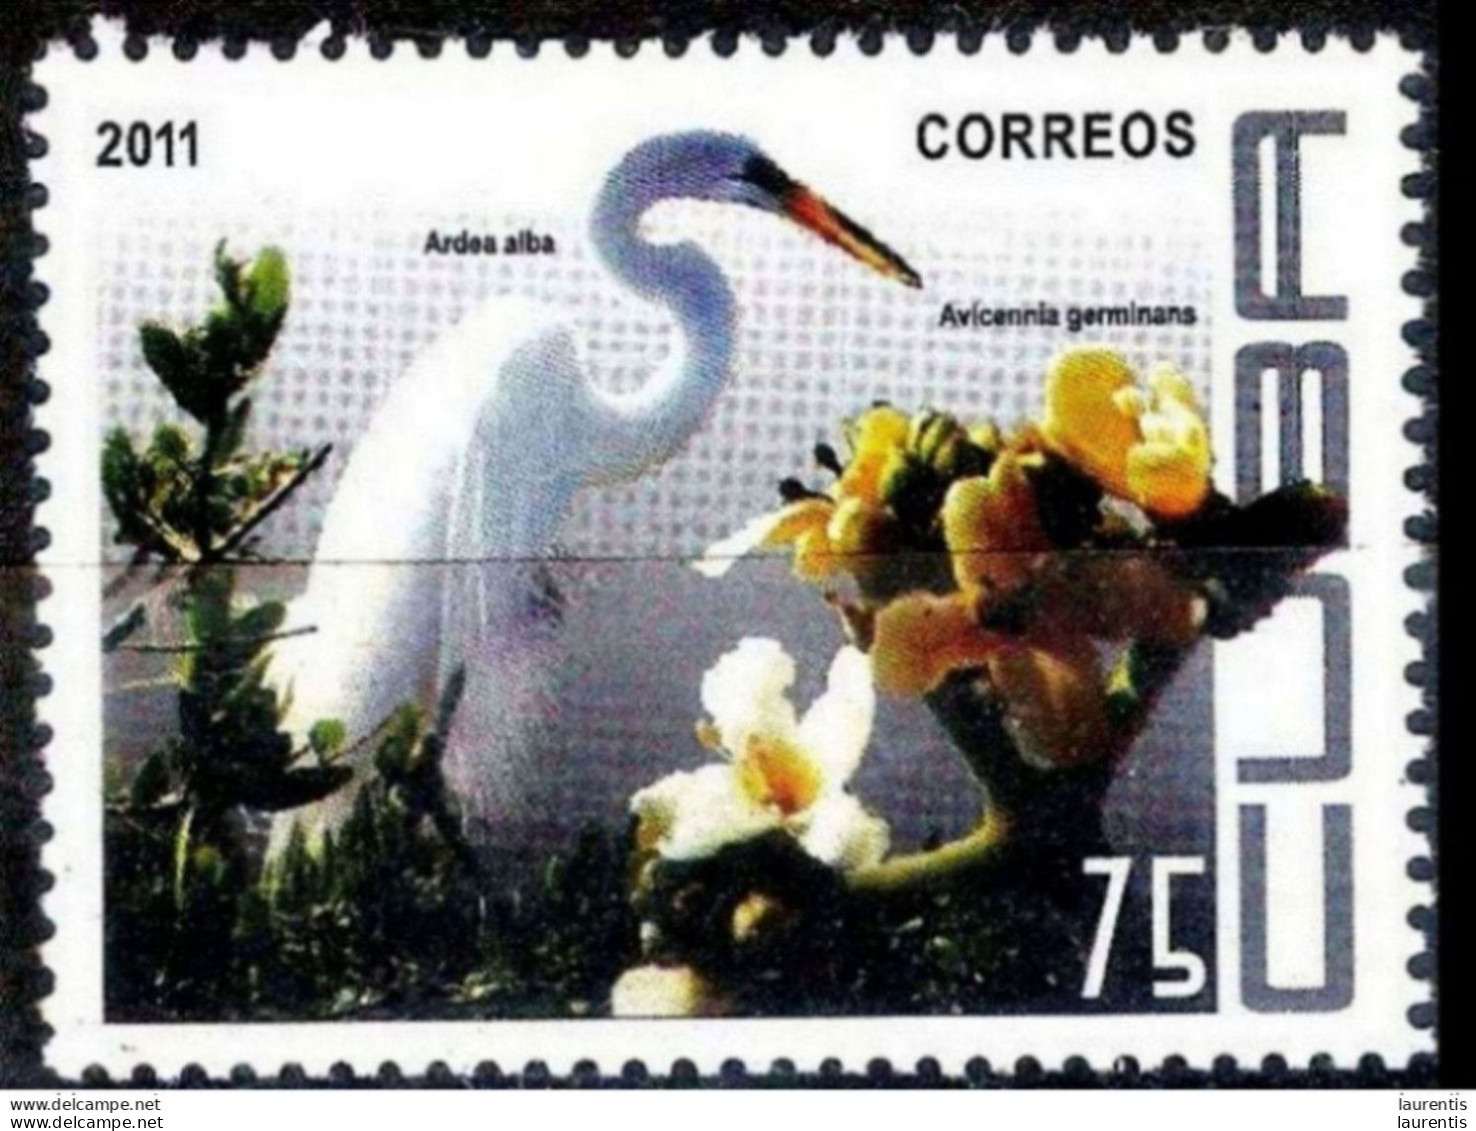 14651  Cranes - Grues - No Other Crane In The Stamp Set - 2011 - MNH - Cb -  1,50 - Cranes And Other Gruiformes